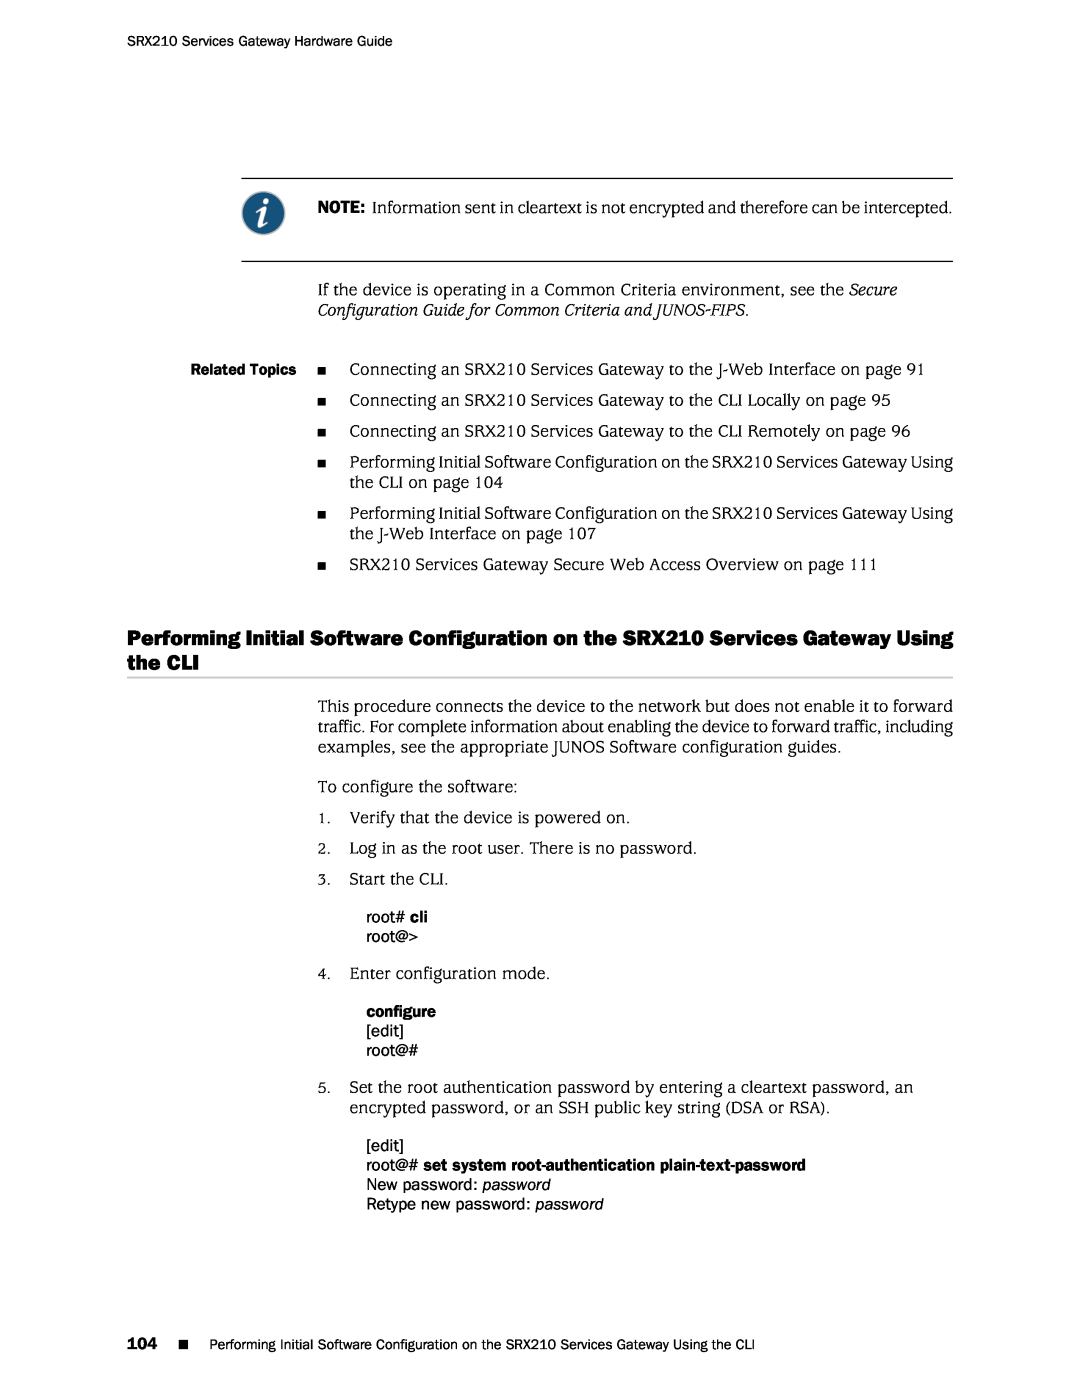 Juniper Networks SRX 210 Configuration Guide for Common Criteria and JUNOS-FIPS, root# cli root@, configure edit root@# 